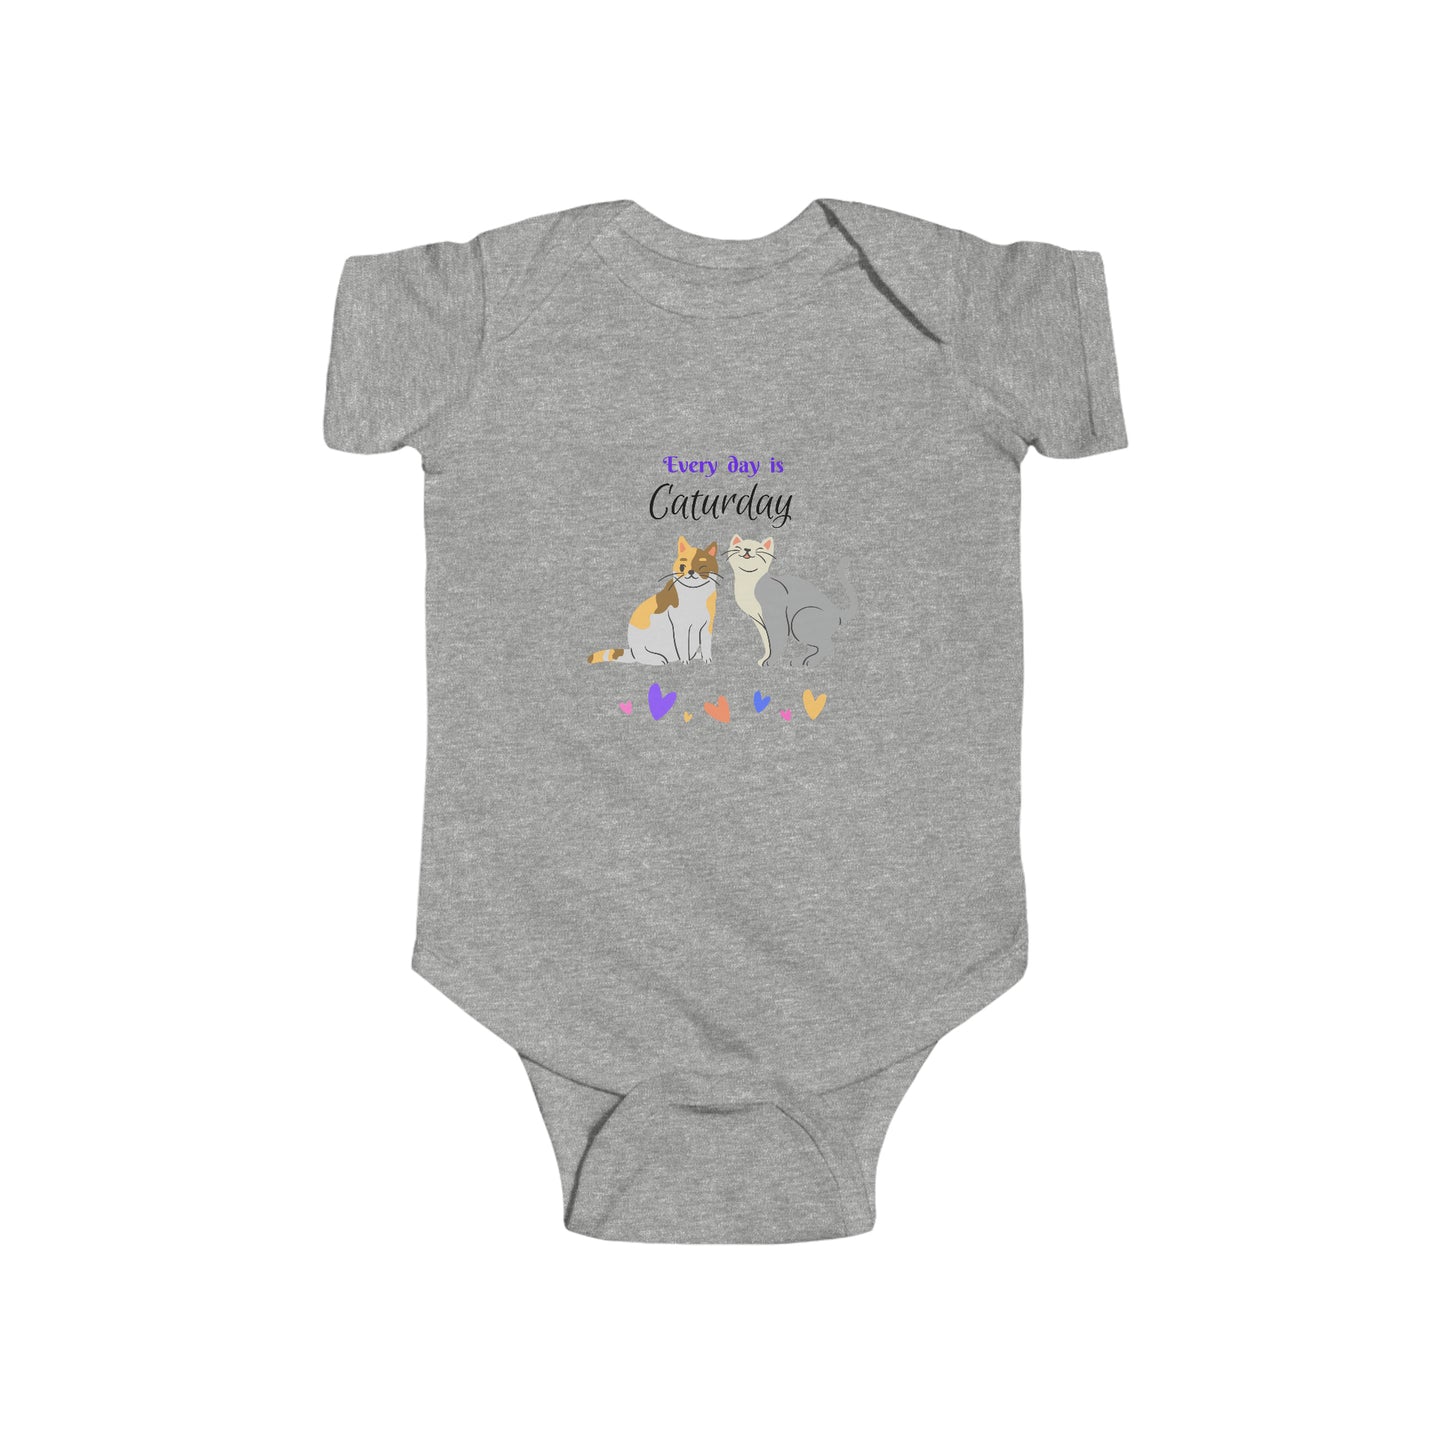 "Cat-Lady Grandma" Baby Bodysuit, "Every day is Caturday" Design, Cat Lover Mom Gift, 4 Colors